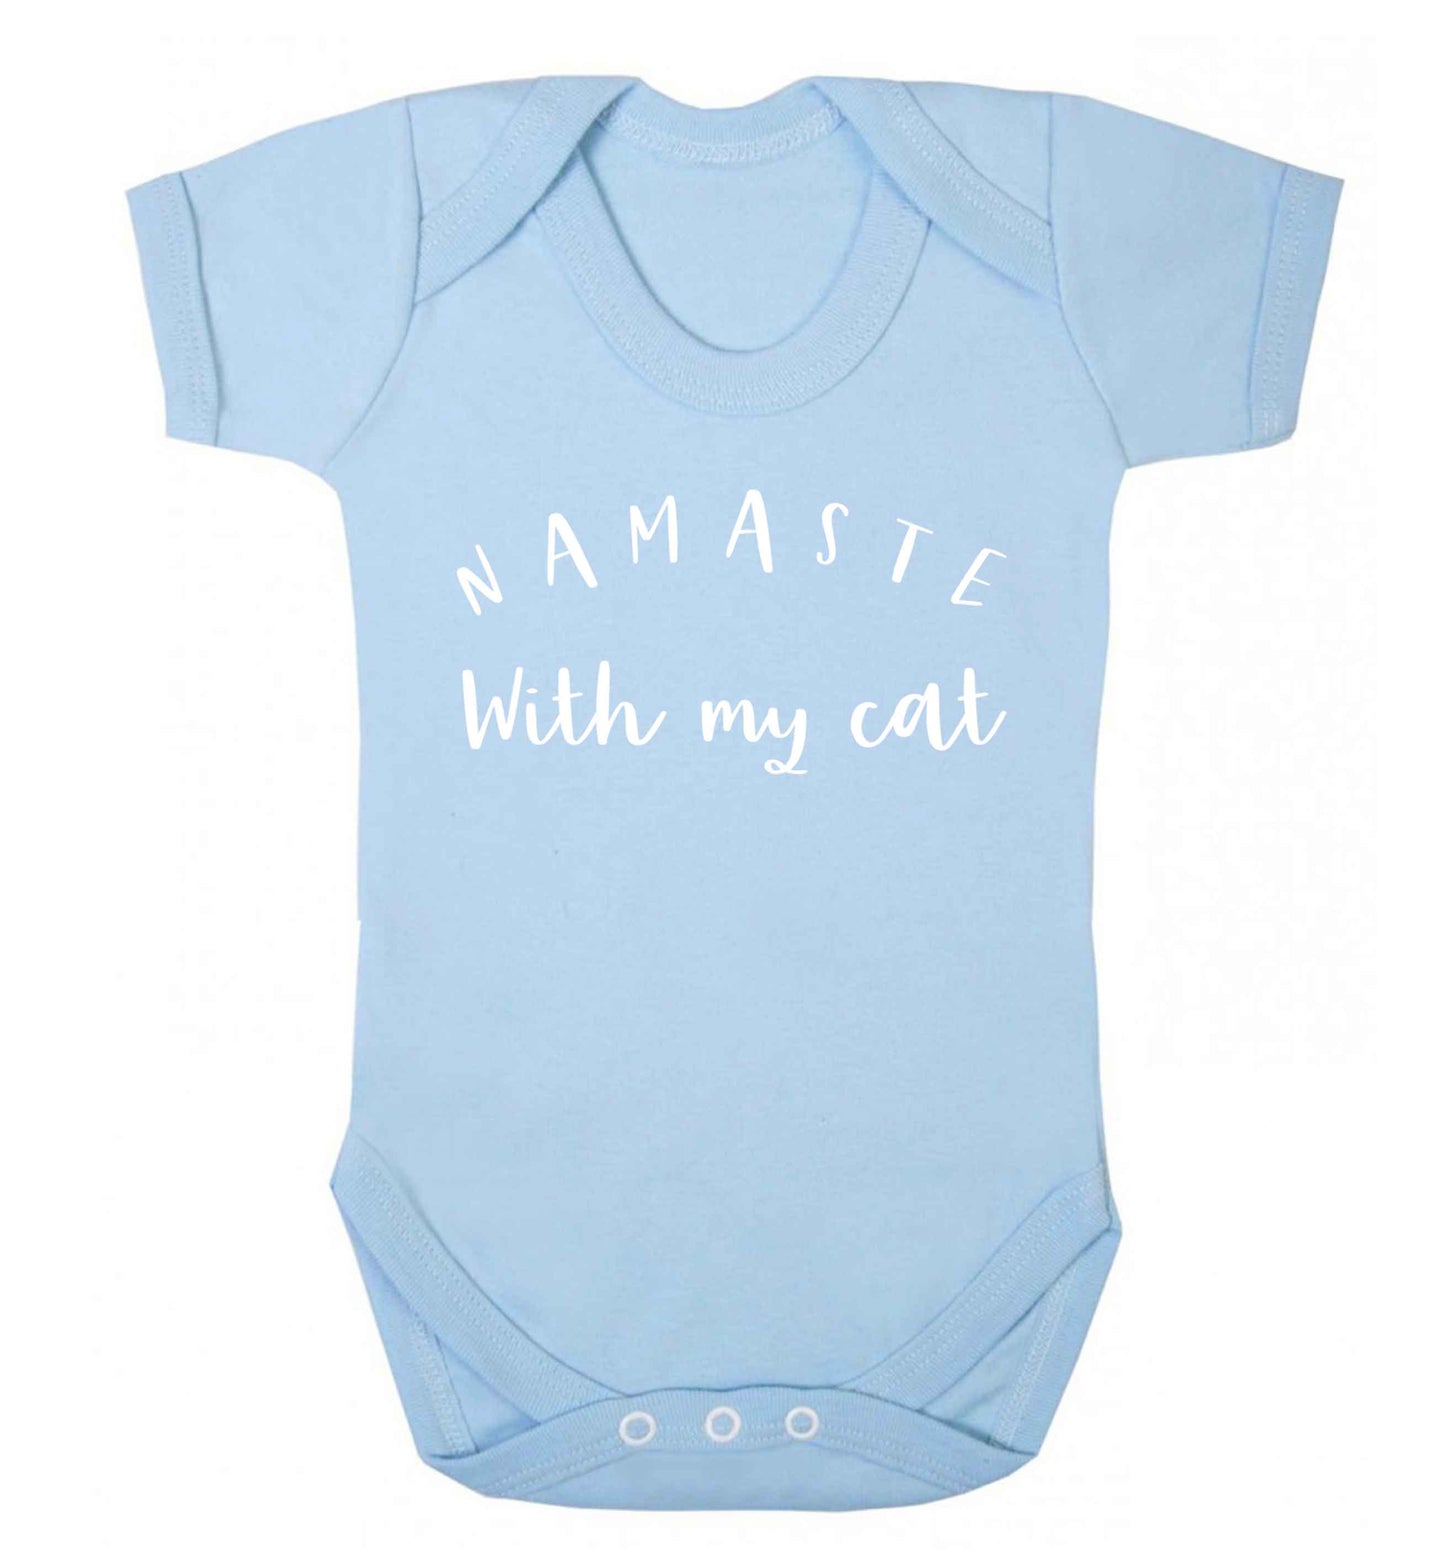 Namaste with my cat Baby Vest pale blue 18-24 months